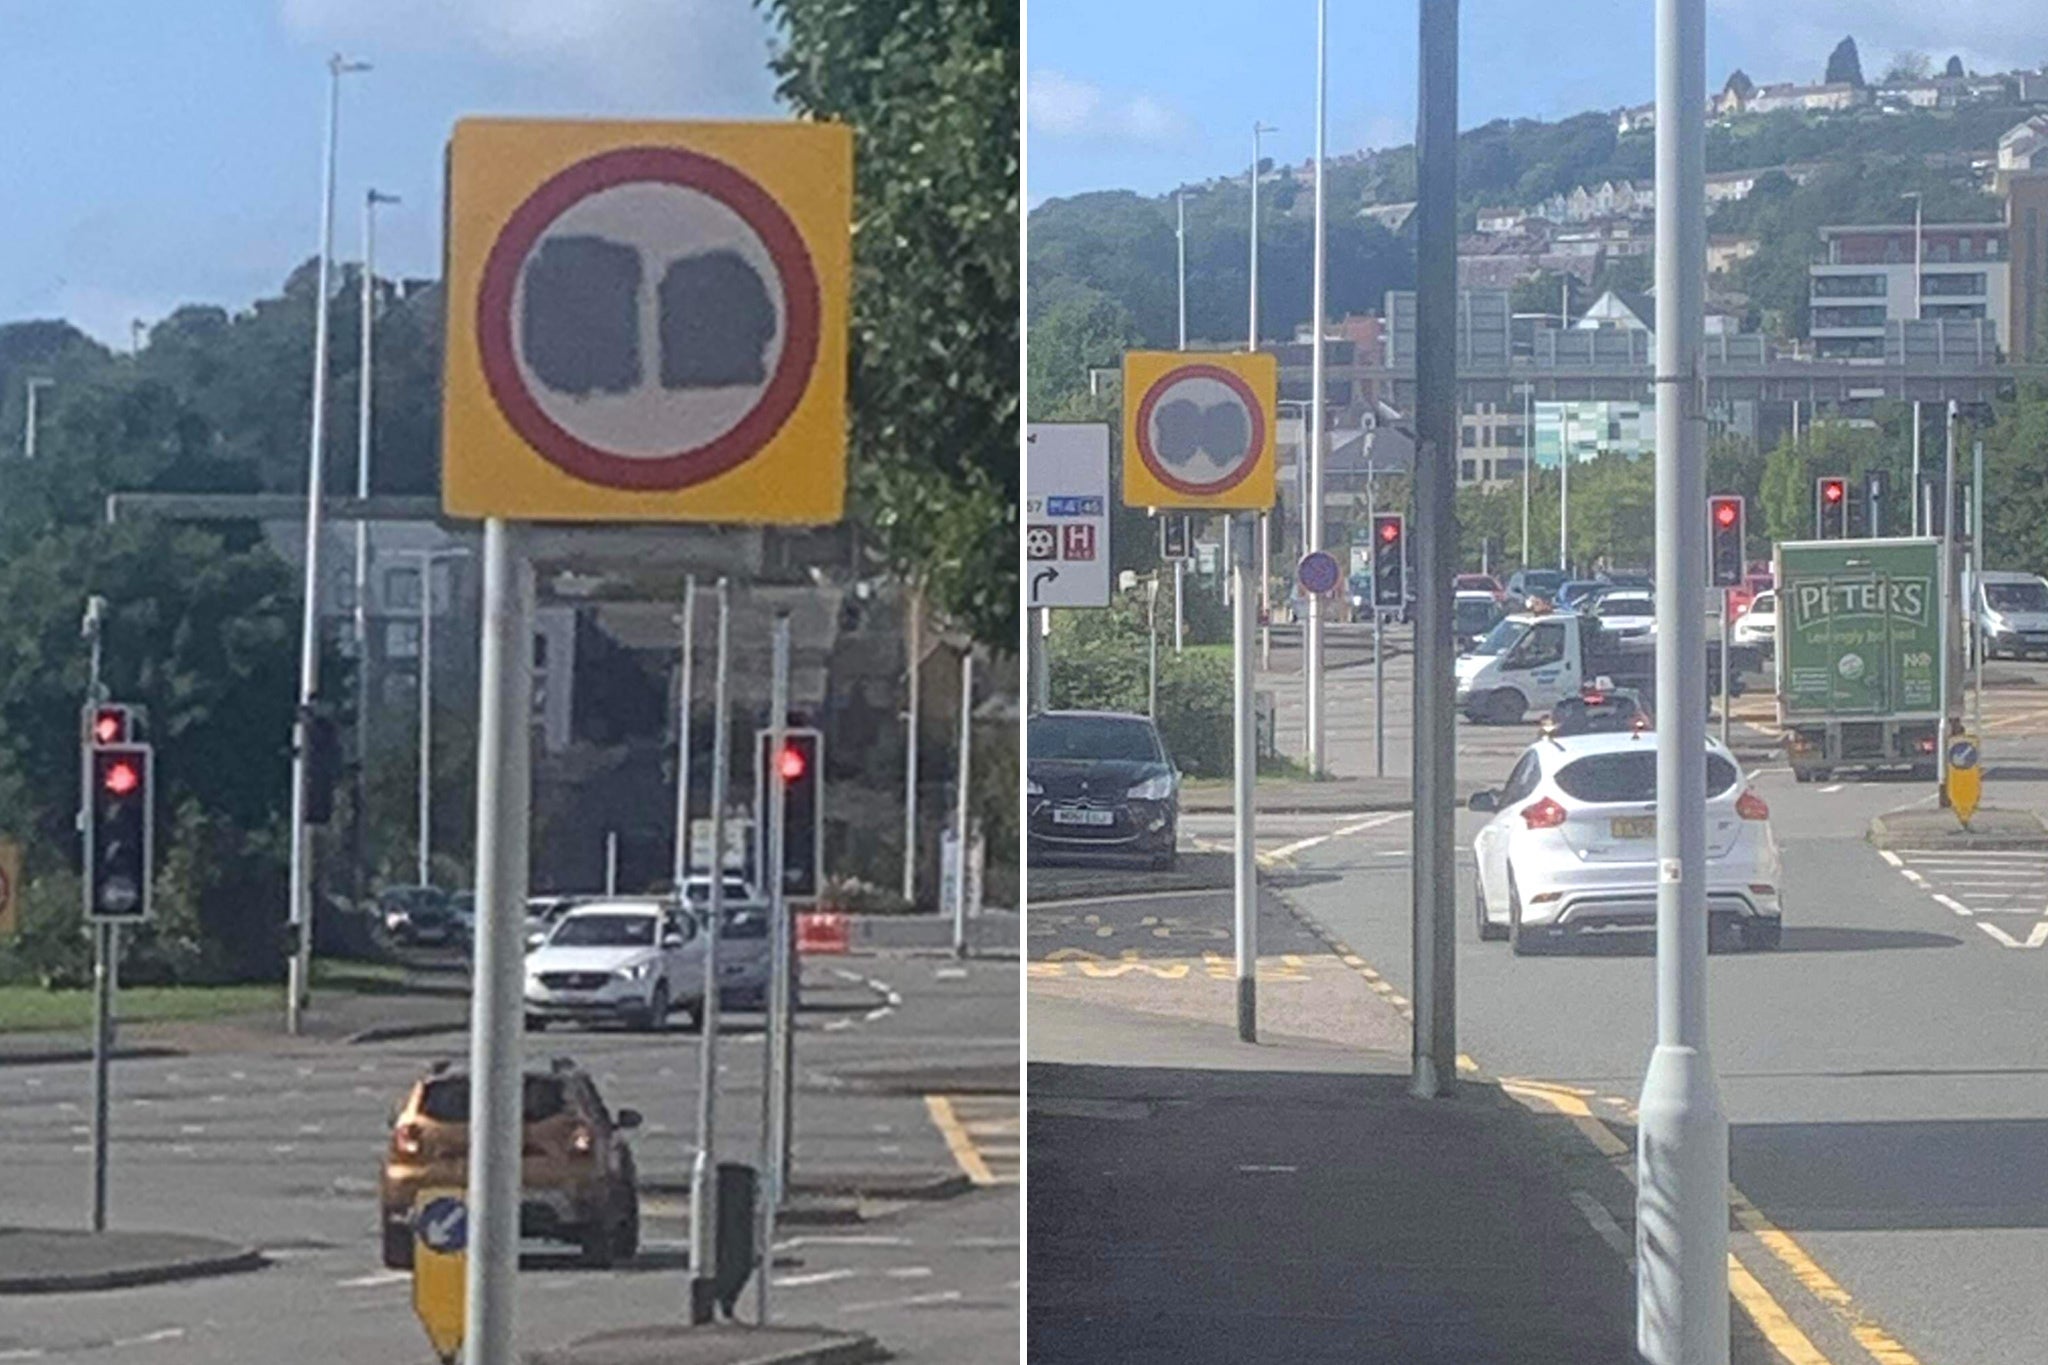 Road signs have been painted over in Wales, leaving residents confused